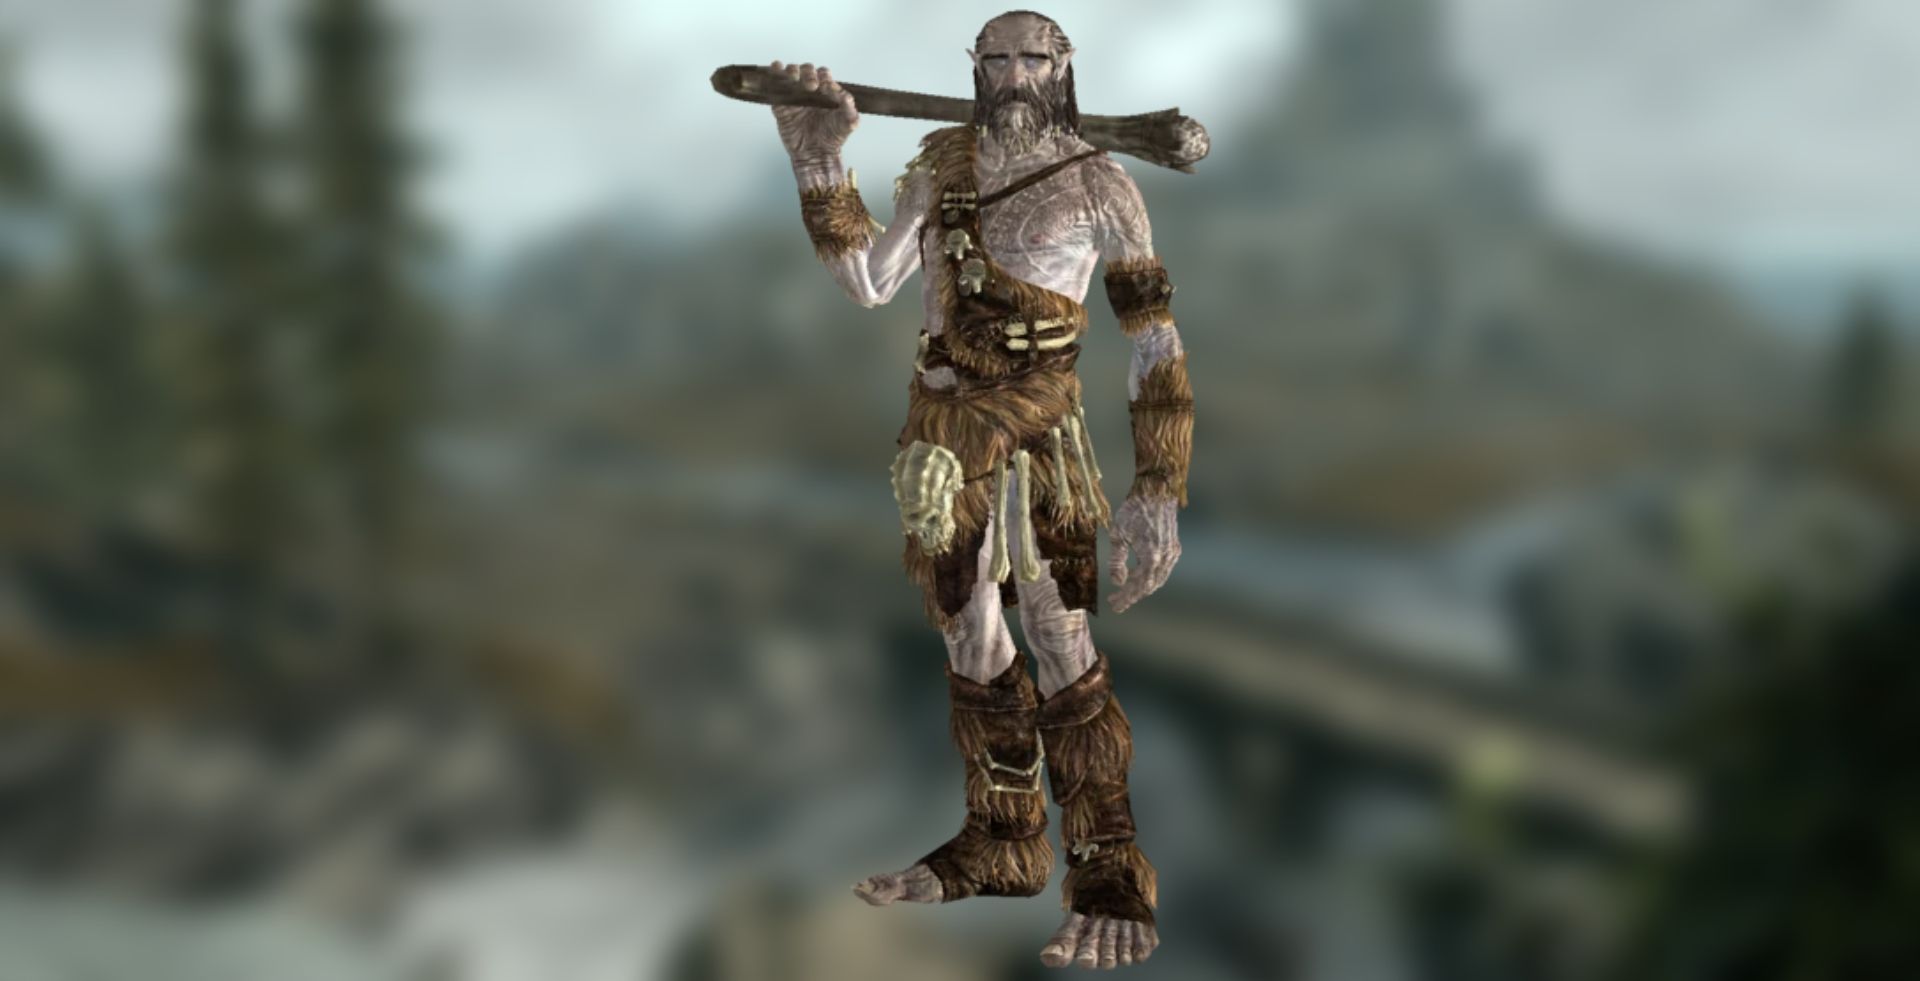 A render of a giant against a blurry screenshot of Skyrim.